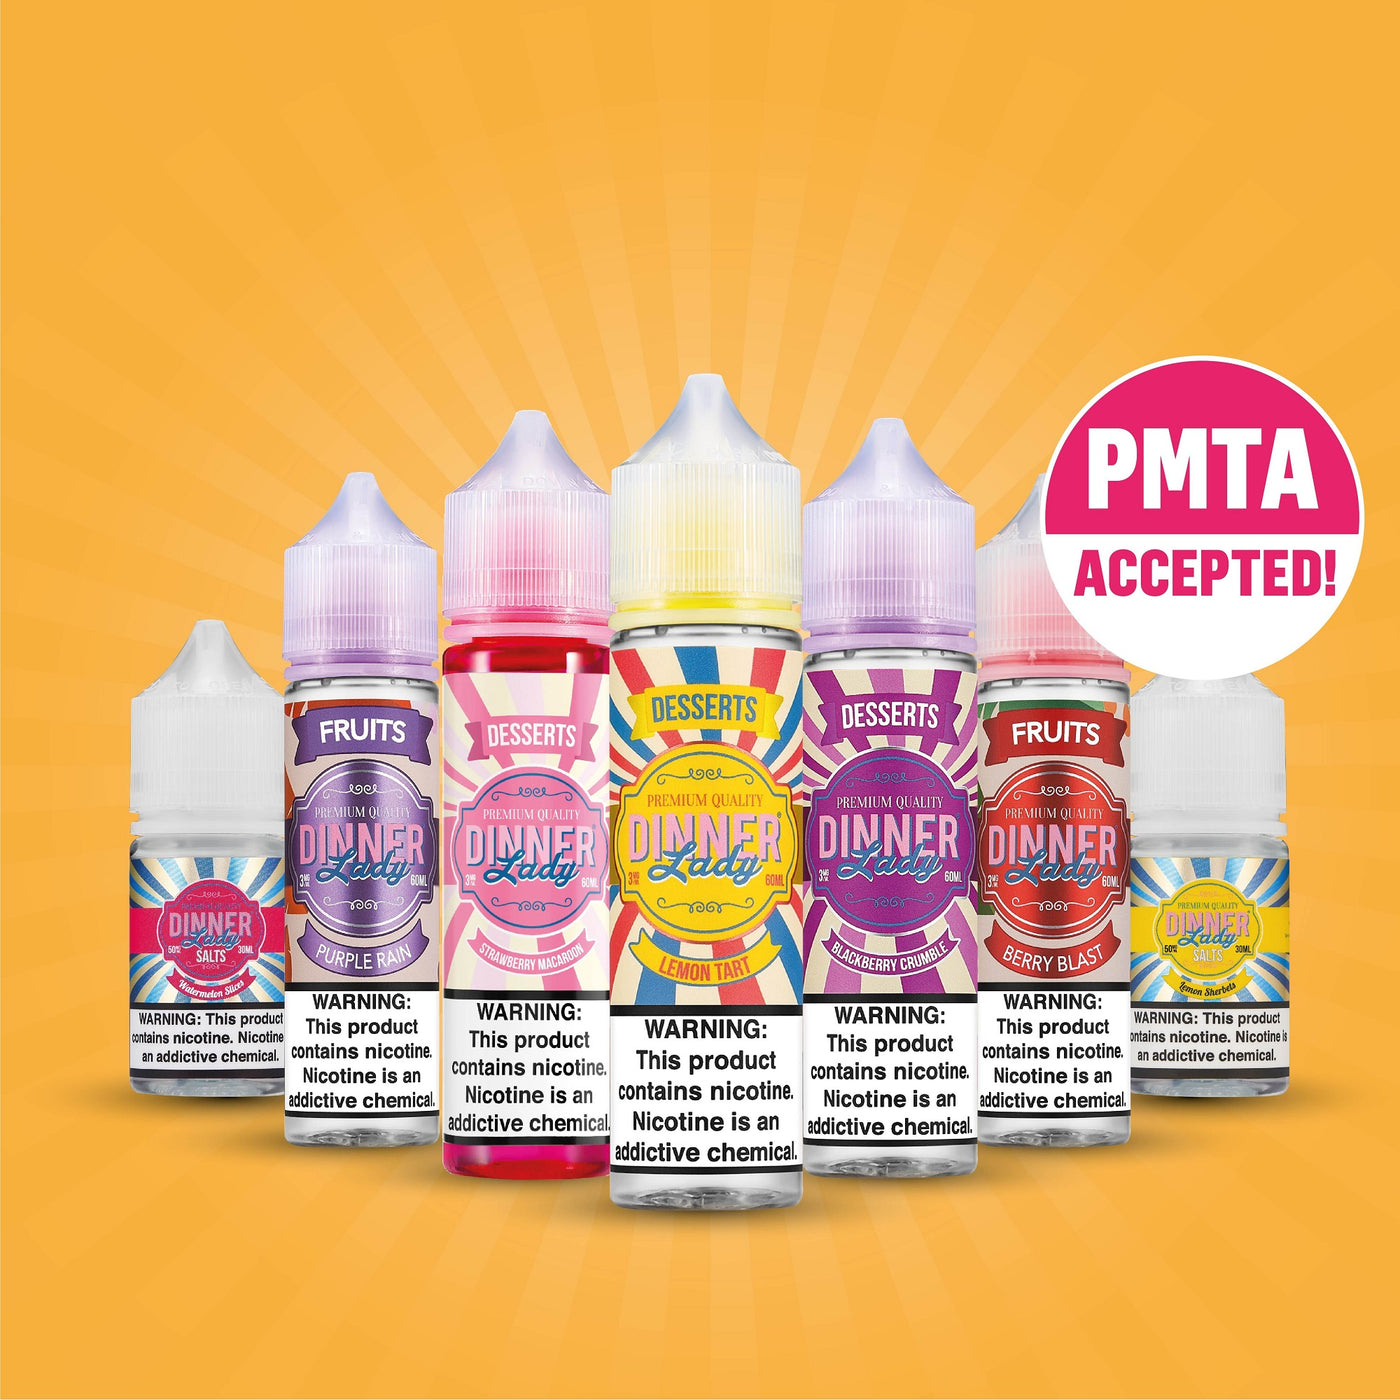 DINNER LADY E-LIQUIDS ACCEPTED FOR PMTA